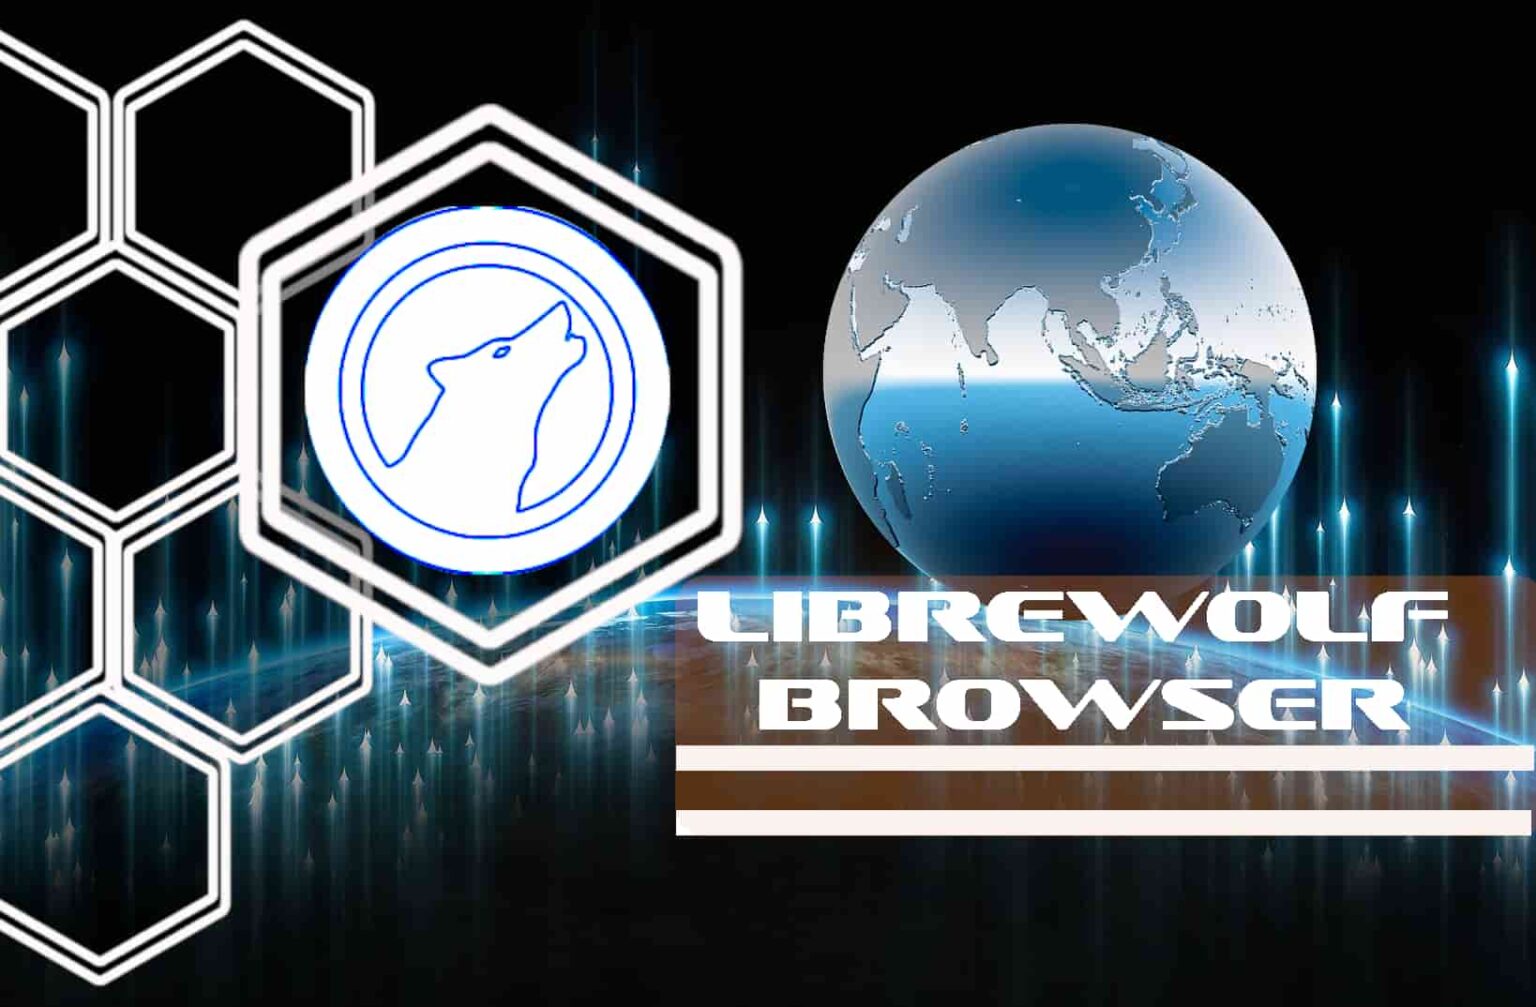 LibreWolf Browser 116.0-1 for android download